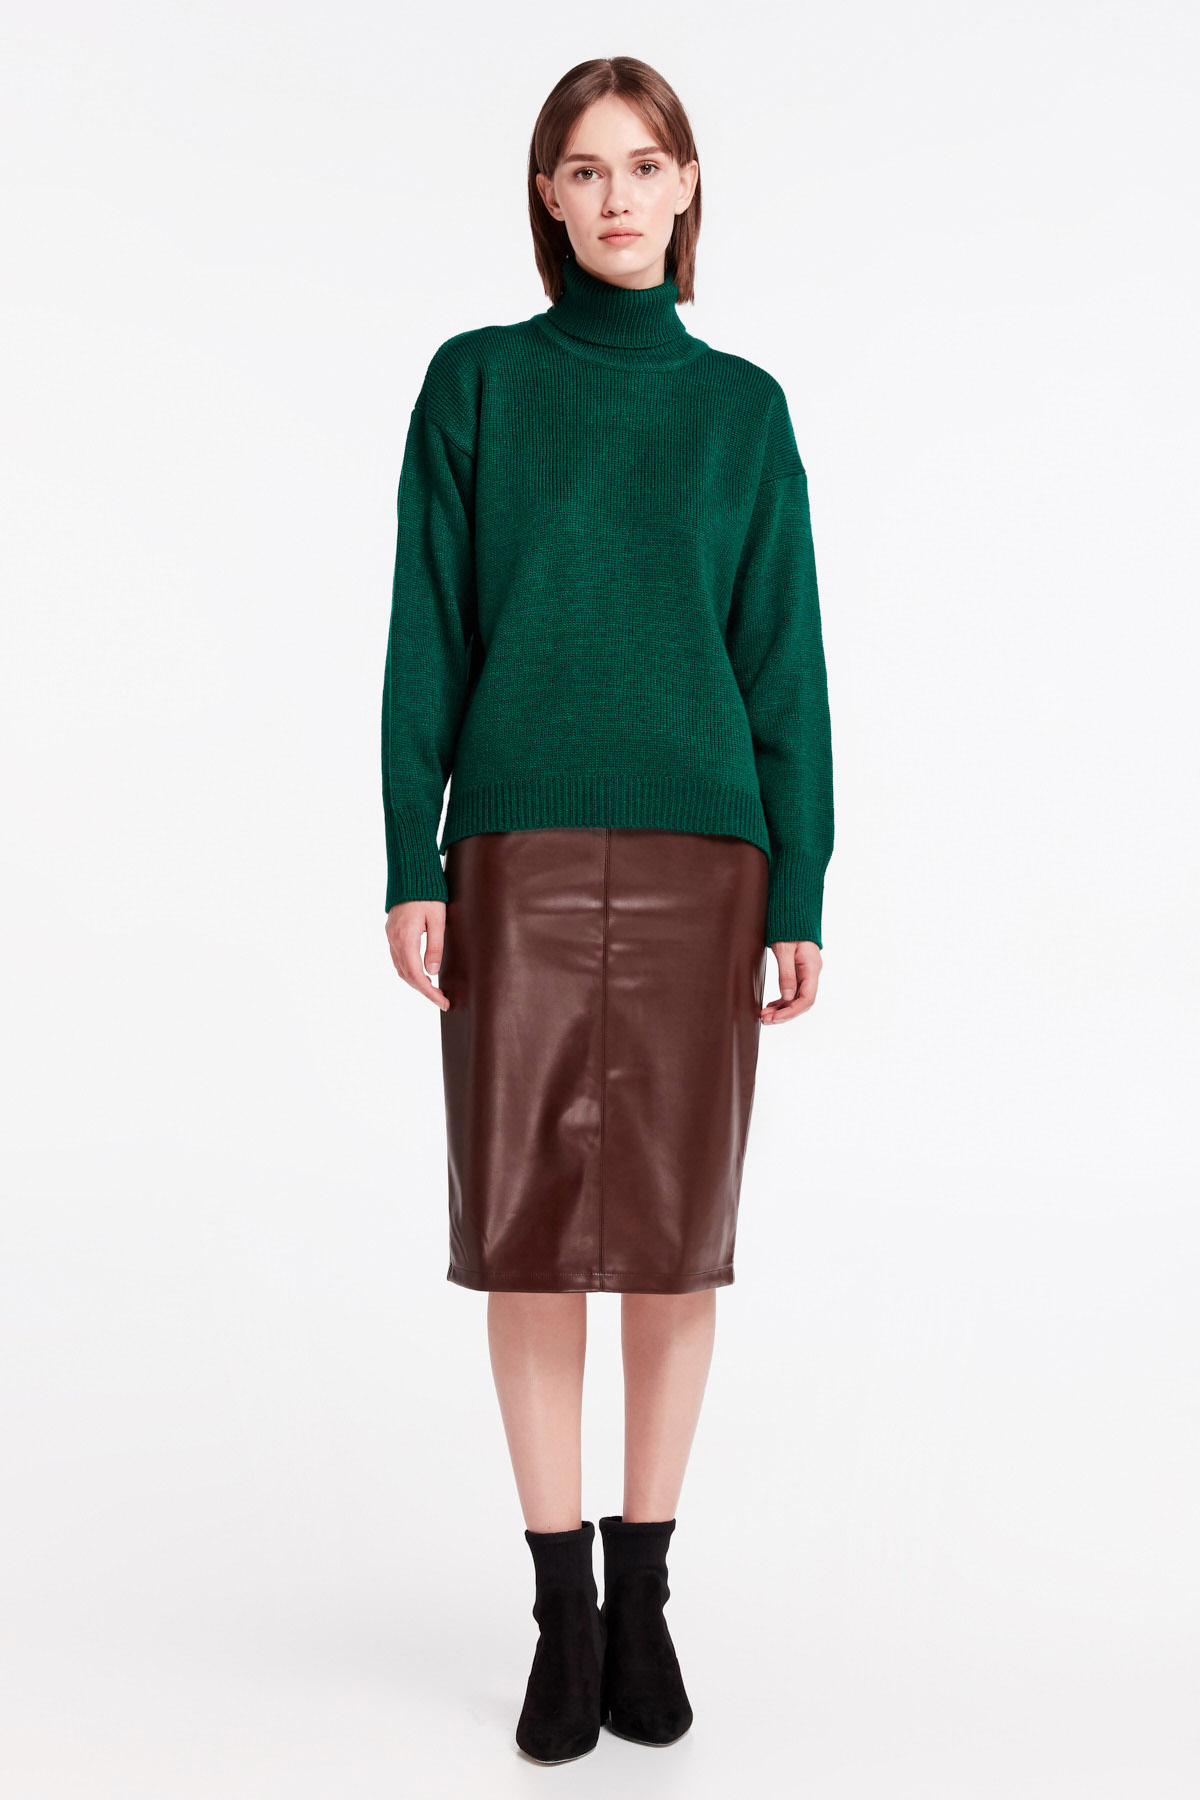 Green knit polo neck sweater, photo 2